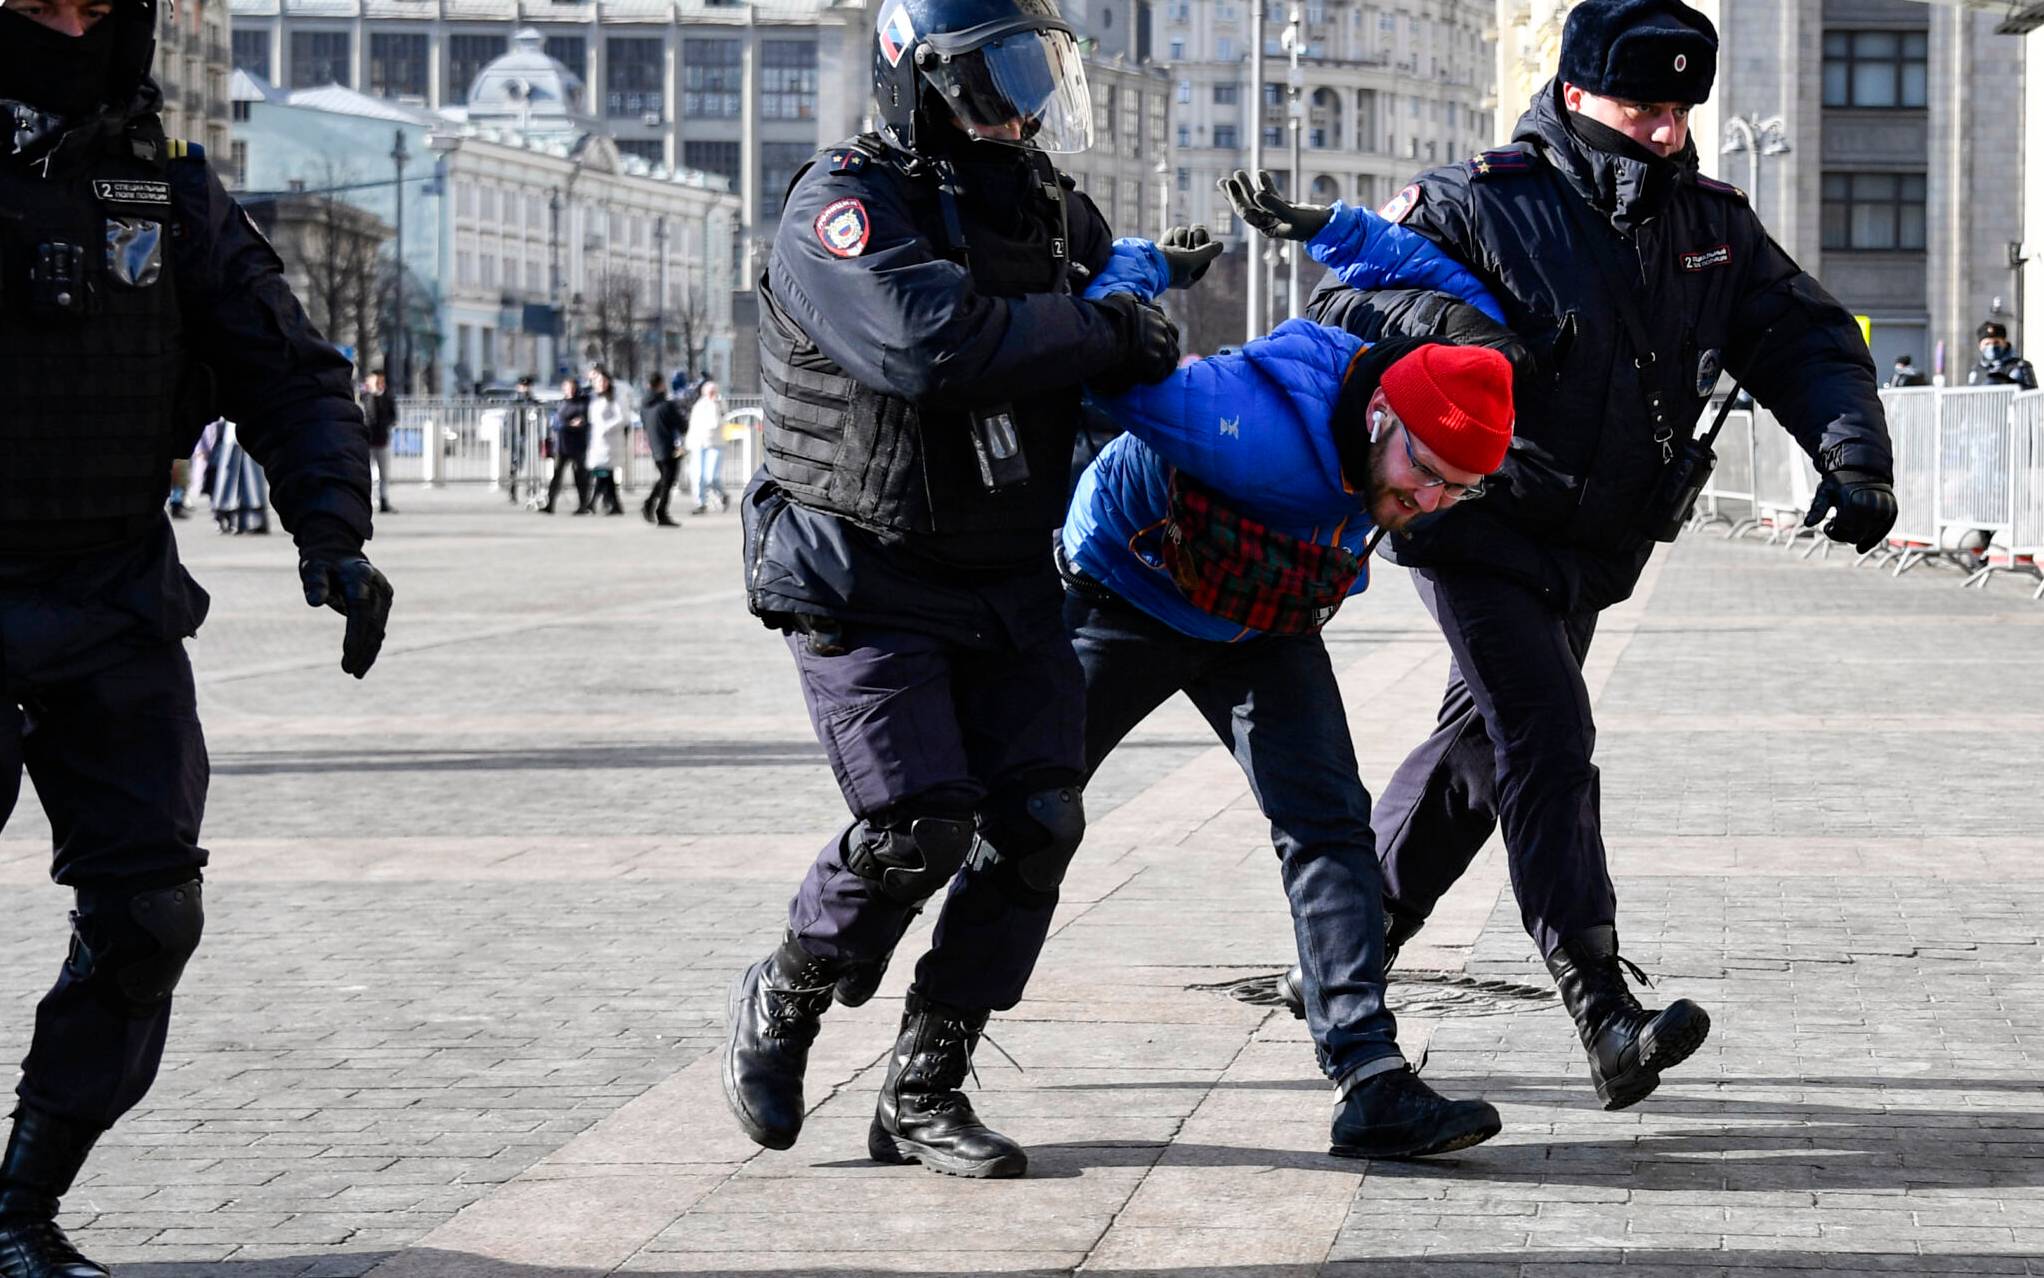 Police officers detain a man during a protest against Russian military action in Ukraine, in Manezhnaya Square in central Moscow on March 13, 2022. (Photo by - / AFP)